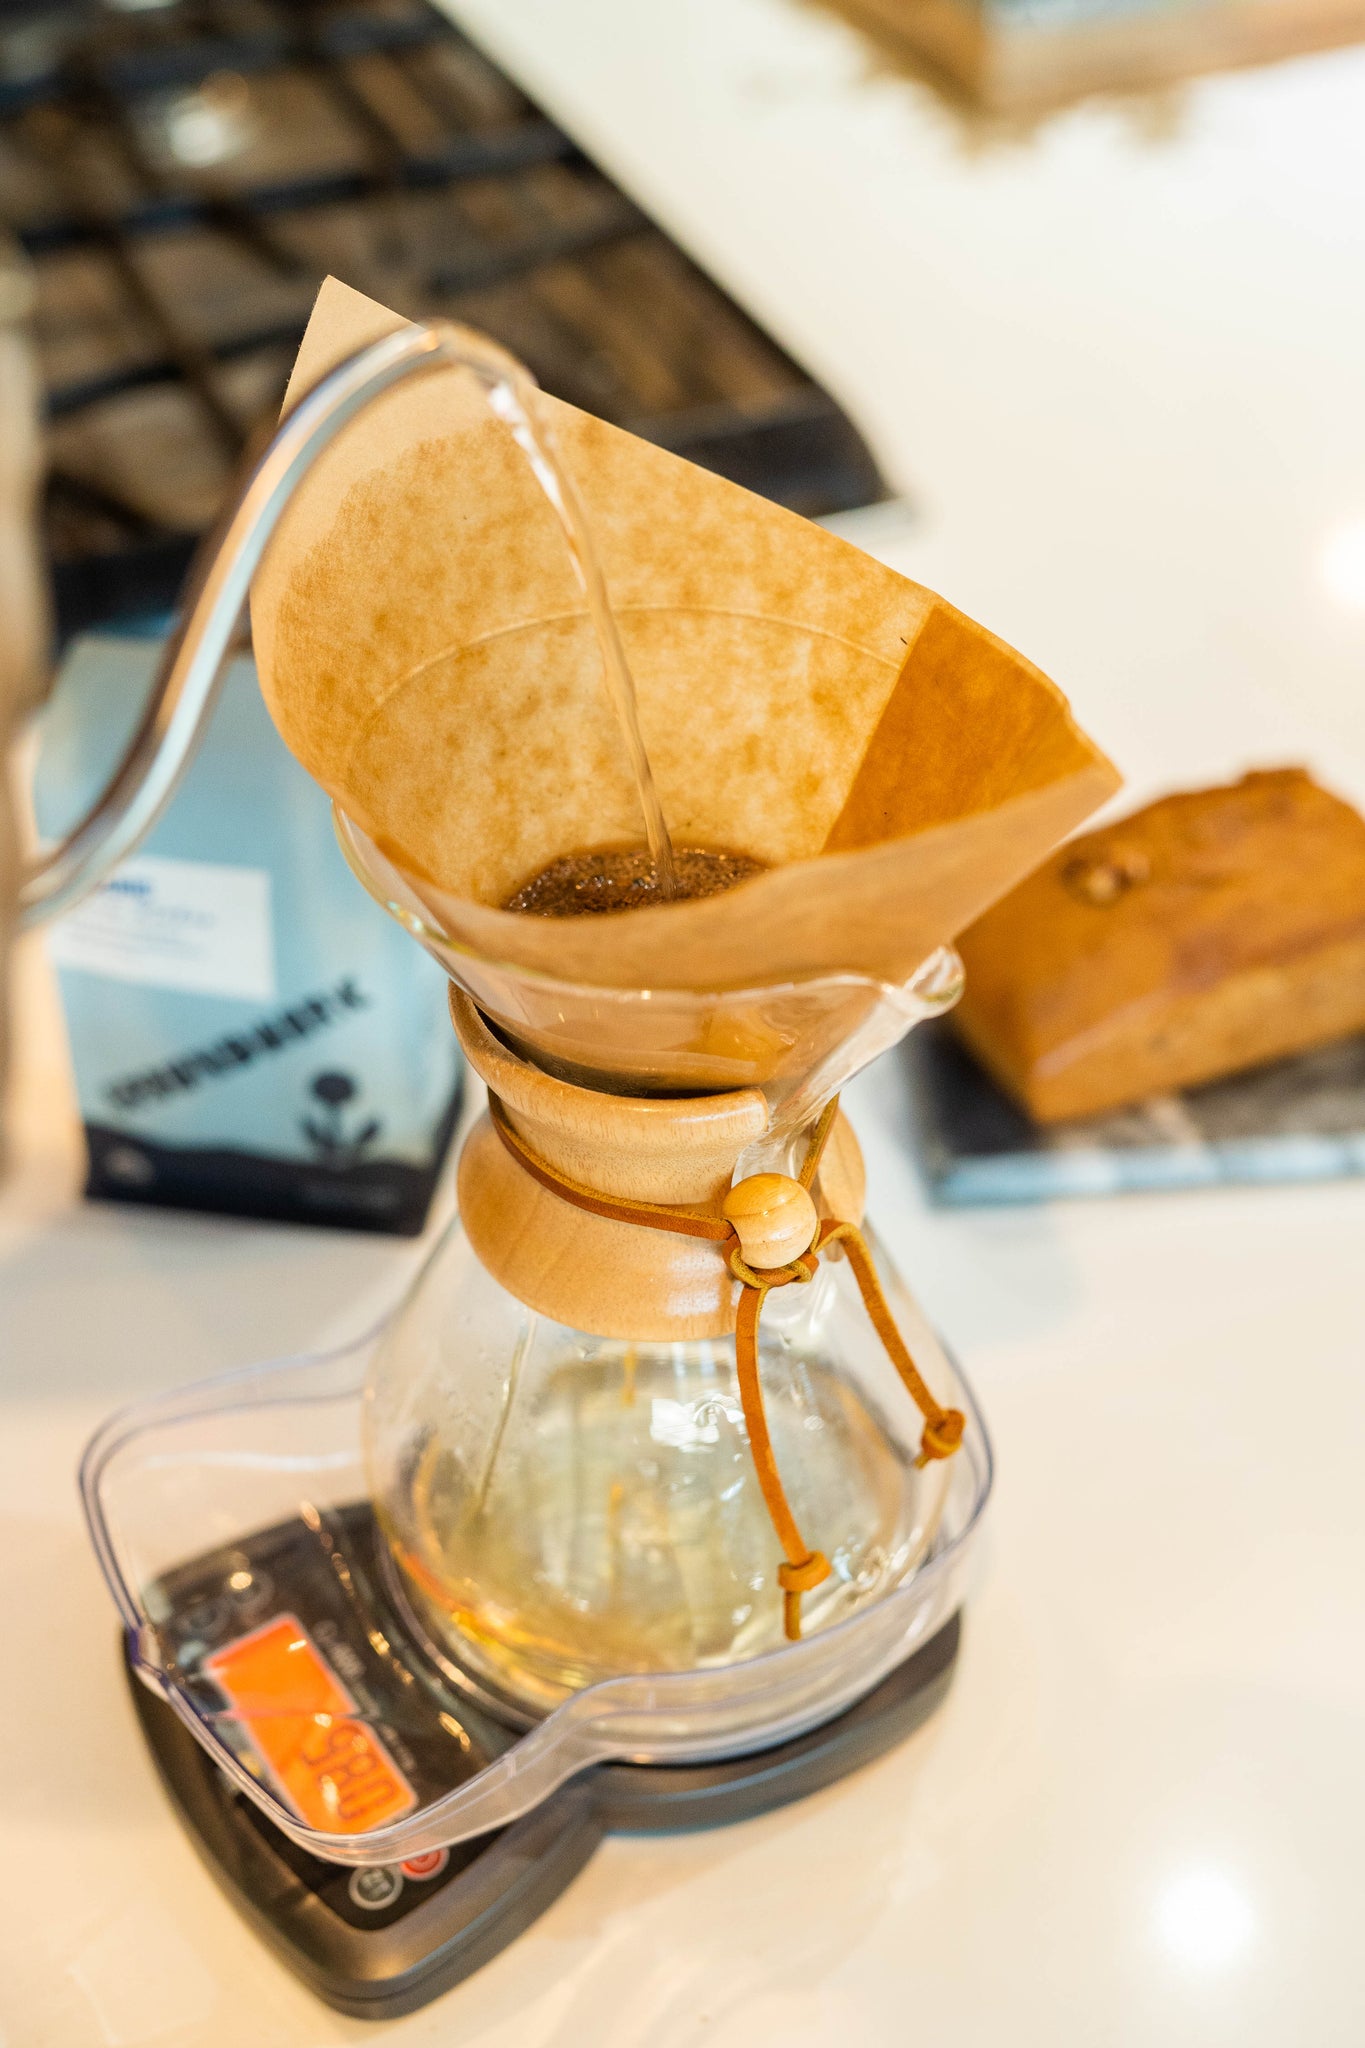 Shop Chemex Brewer at Groundwork Coffee Co.